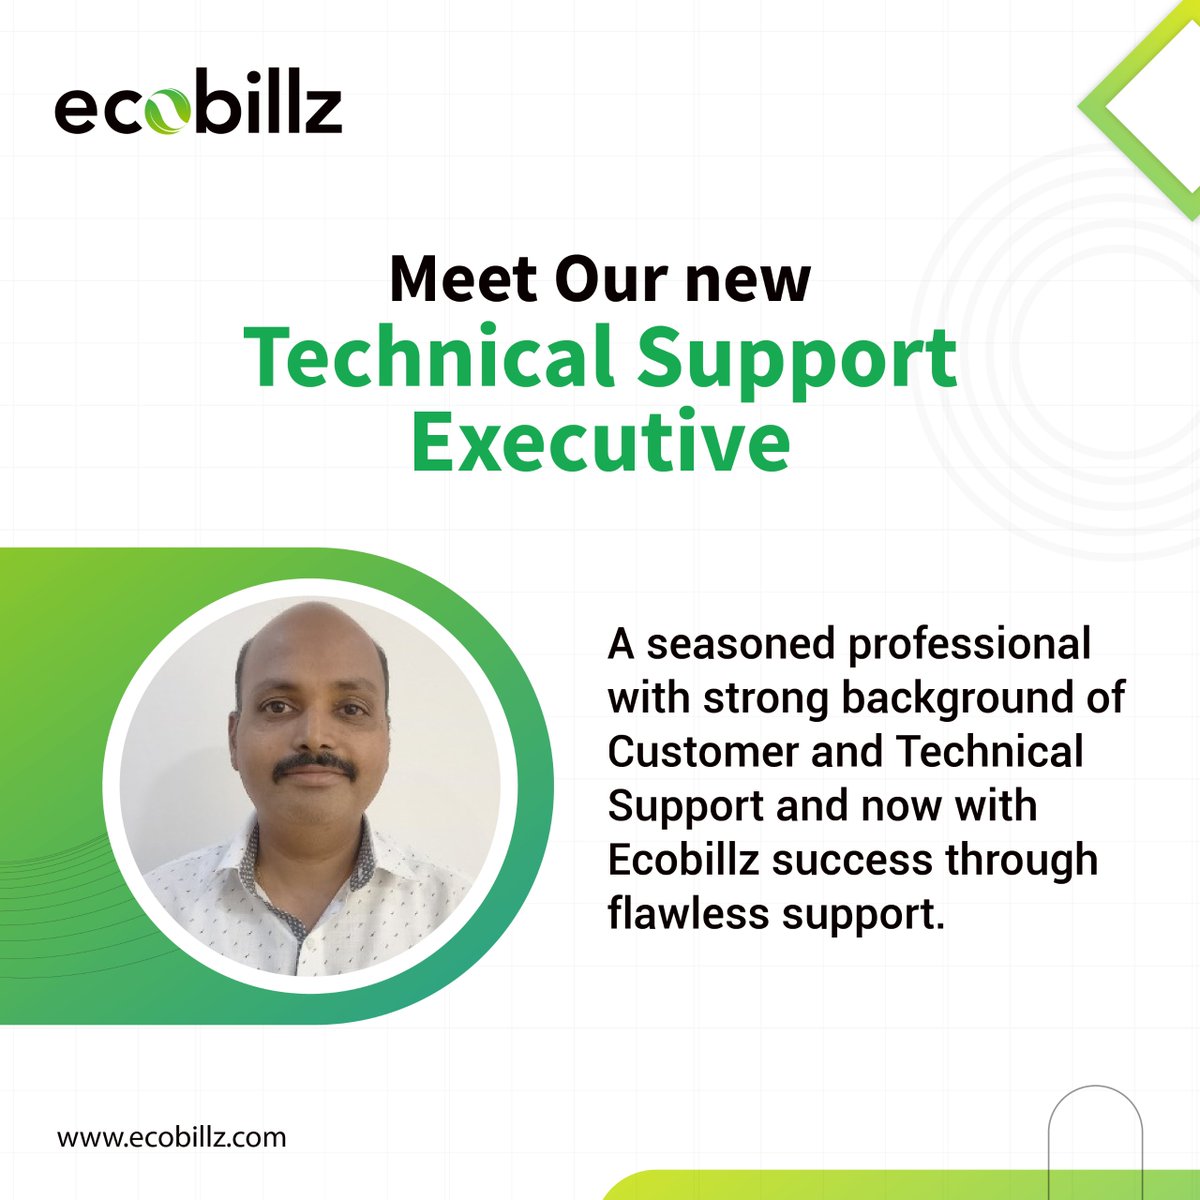 Meet our new technical support executive Mr. Manoj Khanduri. @Ecobillz Private Limited welcomes him. #professional #seasoned #flawlesssupport #technicalsupport #supportsystem #executive #success #strongbackground #newjoinee #newemployee #automation #hospitality